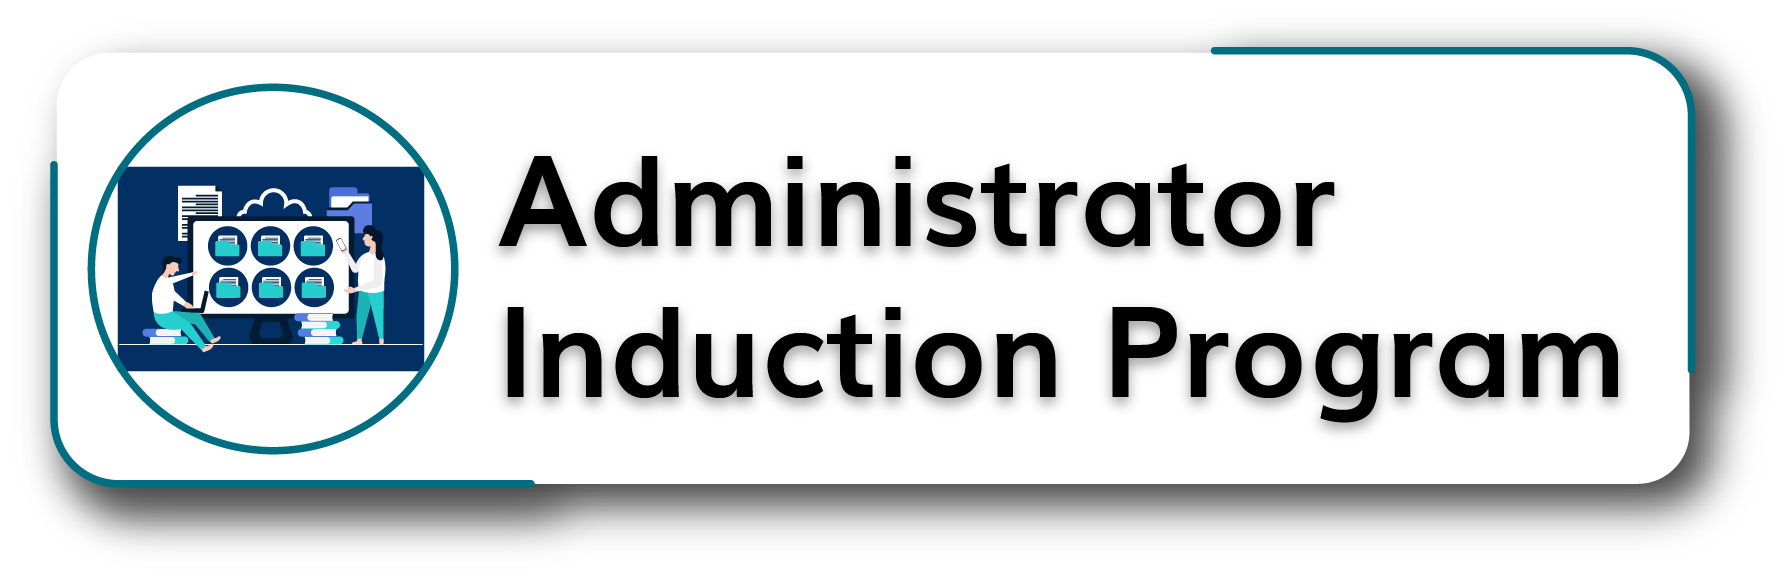 Administrator Induction Program Button